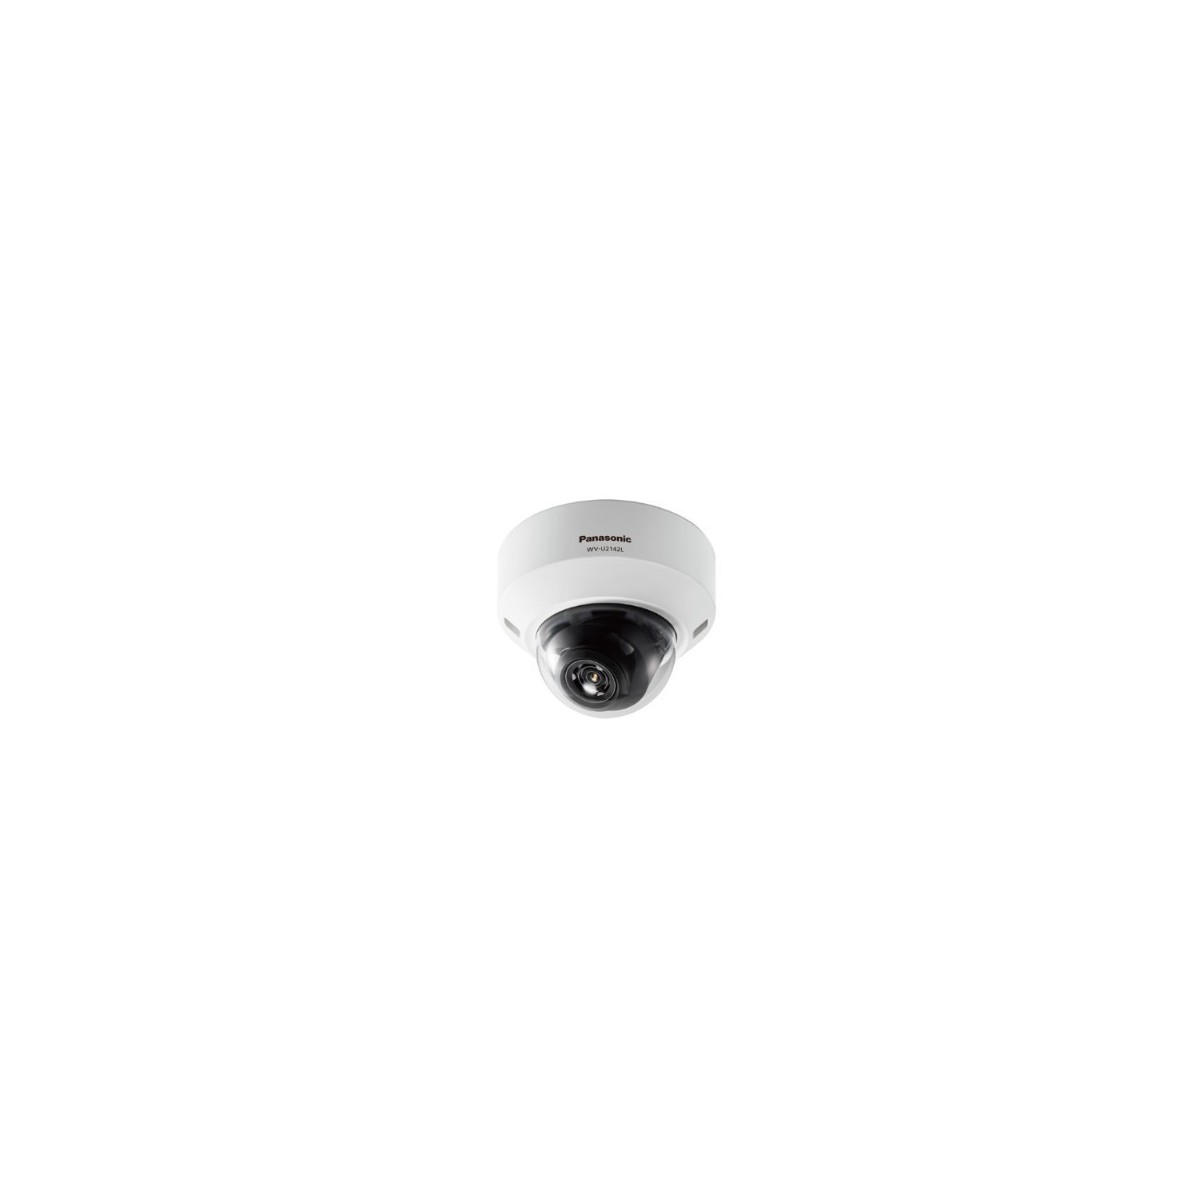 Panasonic WV-U2142L - IP security camera - Indoor - Wired - Dome - Ceiling - Black - White